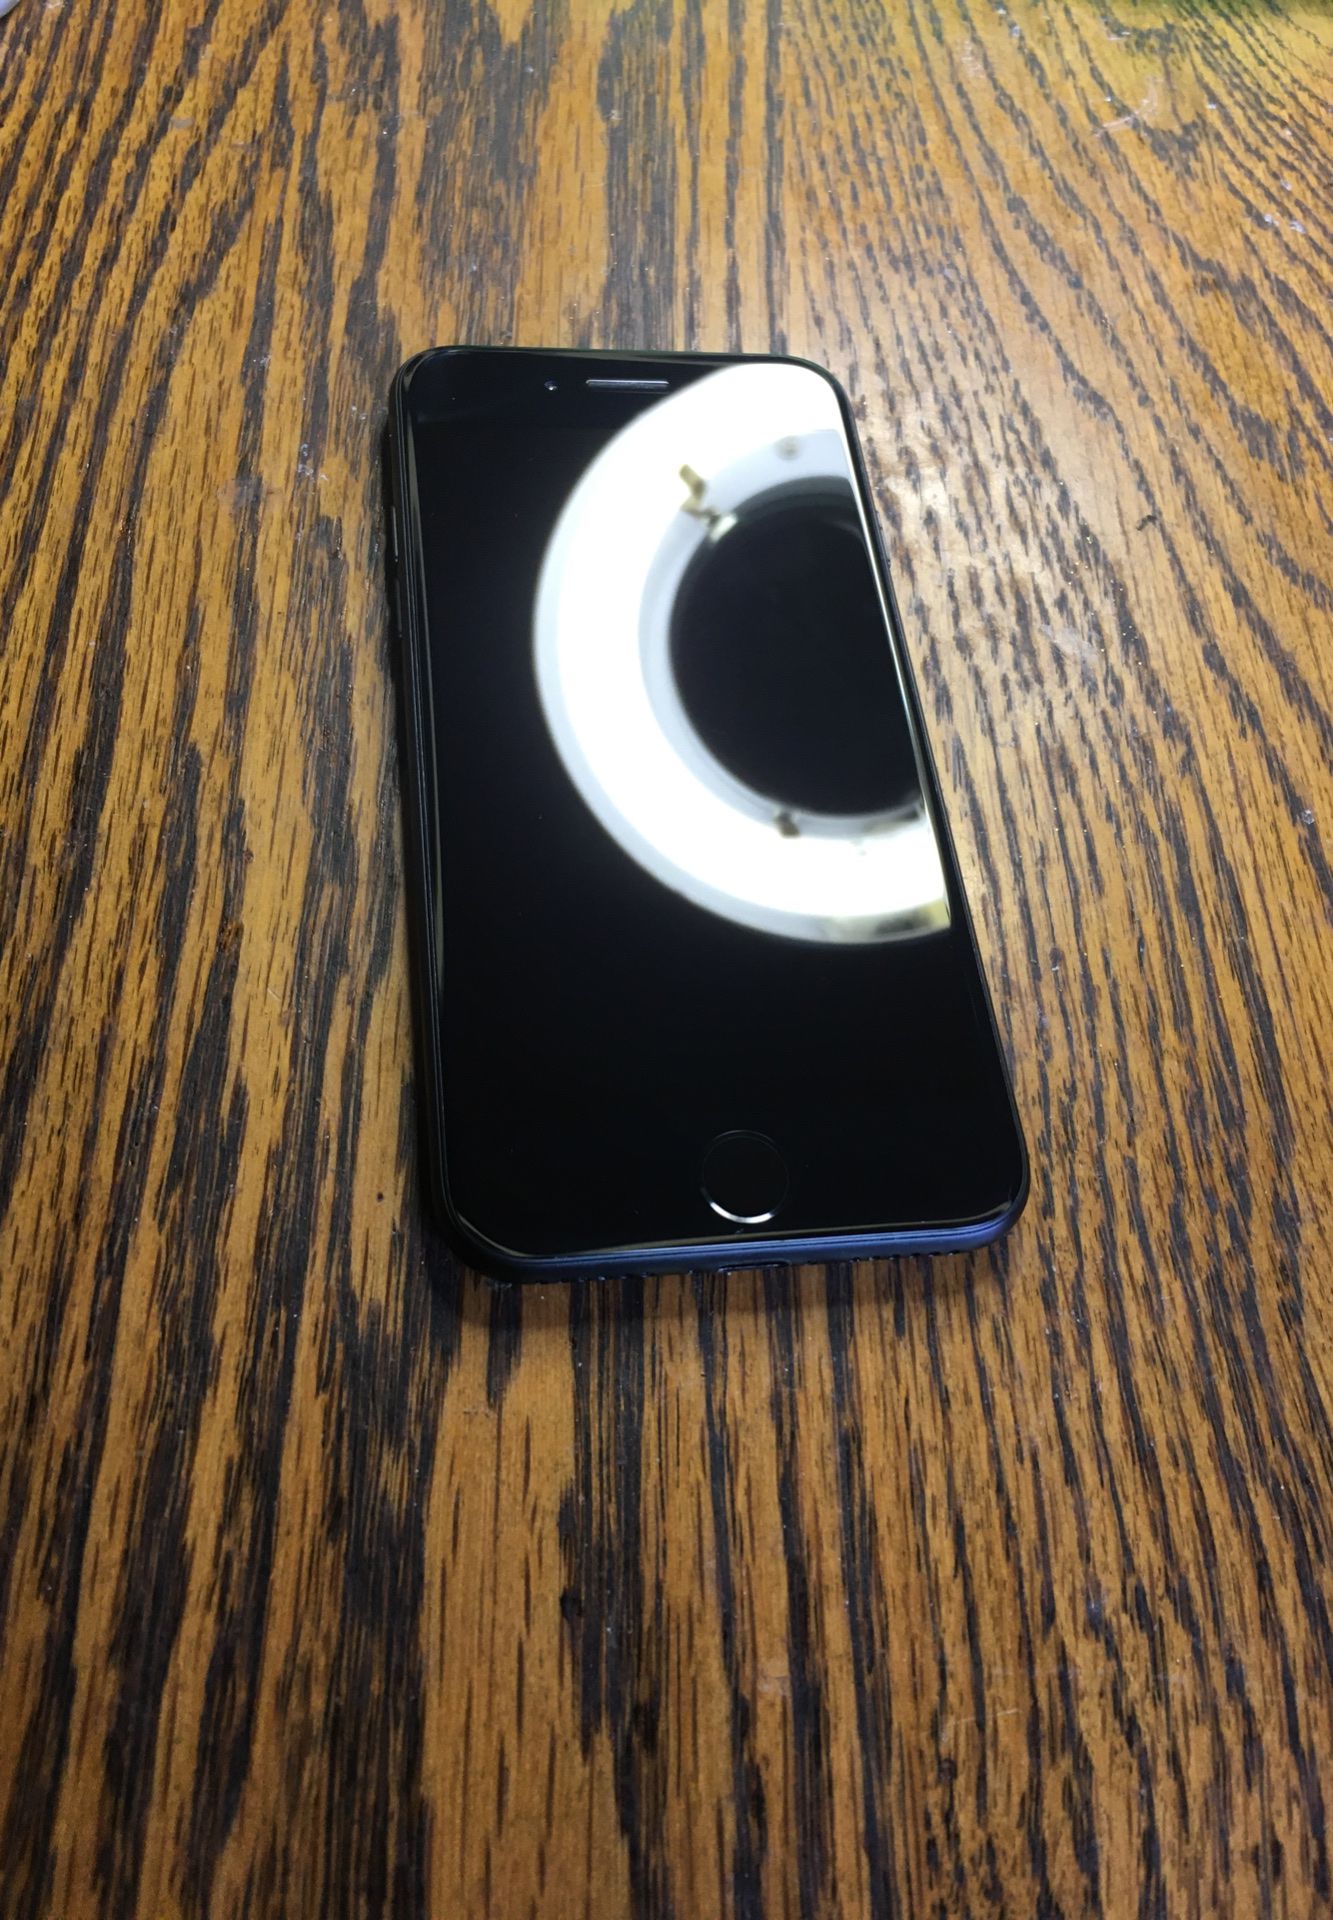 iPhone 7 great condition